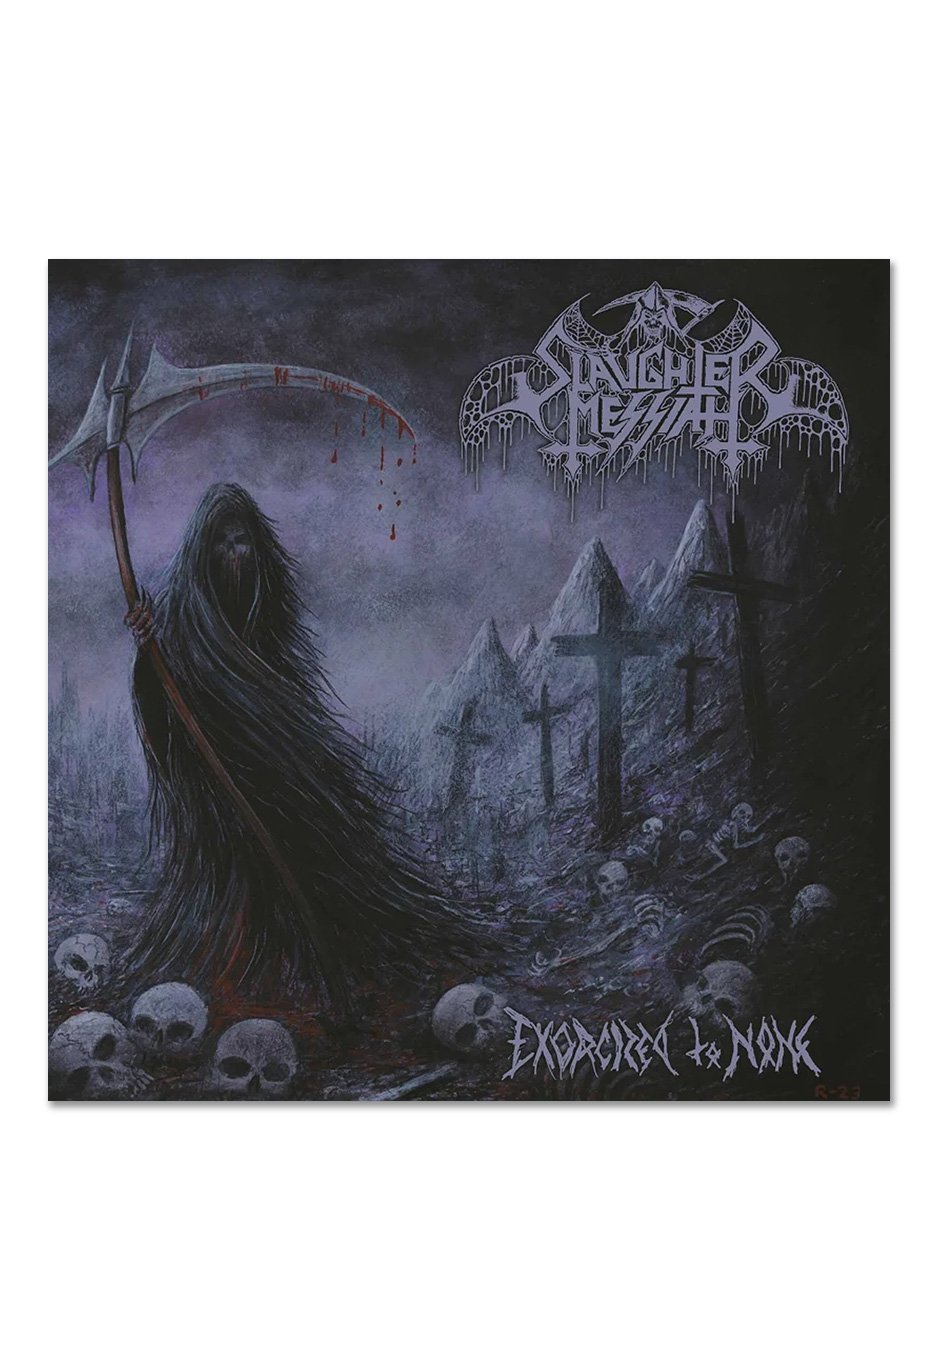 Slaughter Messiah - Exorcized To None Ltd. Galaxy - Colored Vinyl